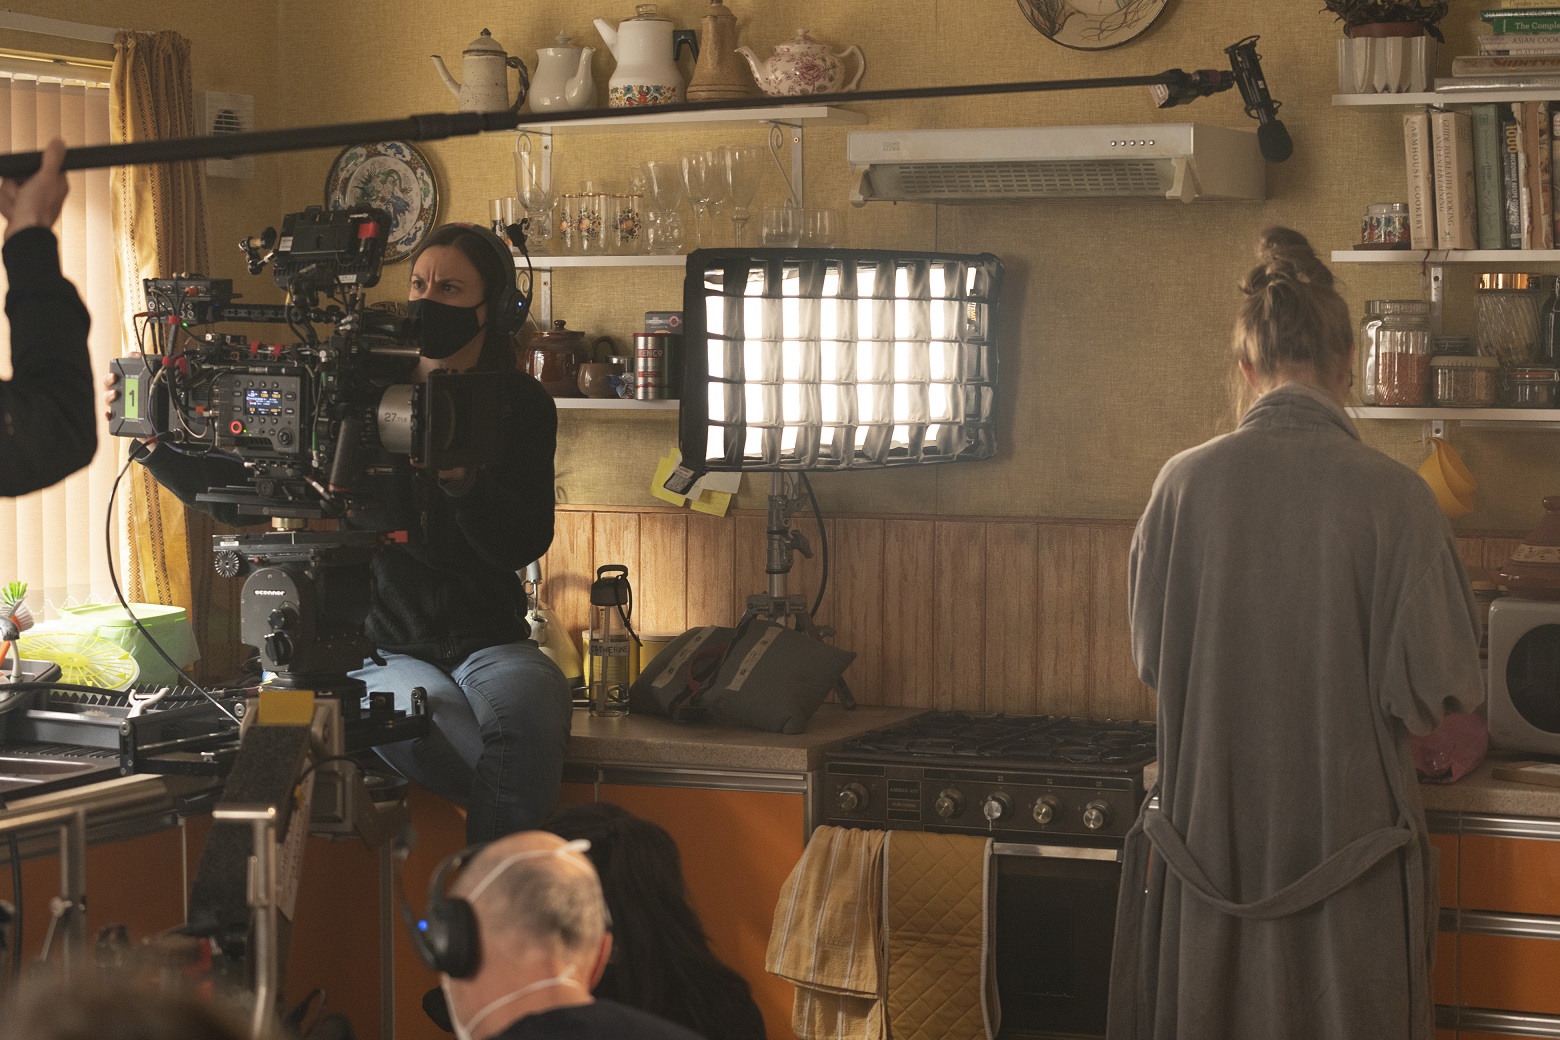 Erin Doherty filming on set at The Bottle Yard Studios (credit: BBC/Amazon Studios/Mam Tor Productions